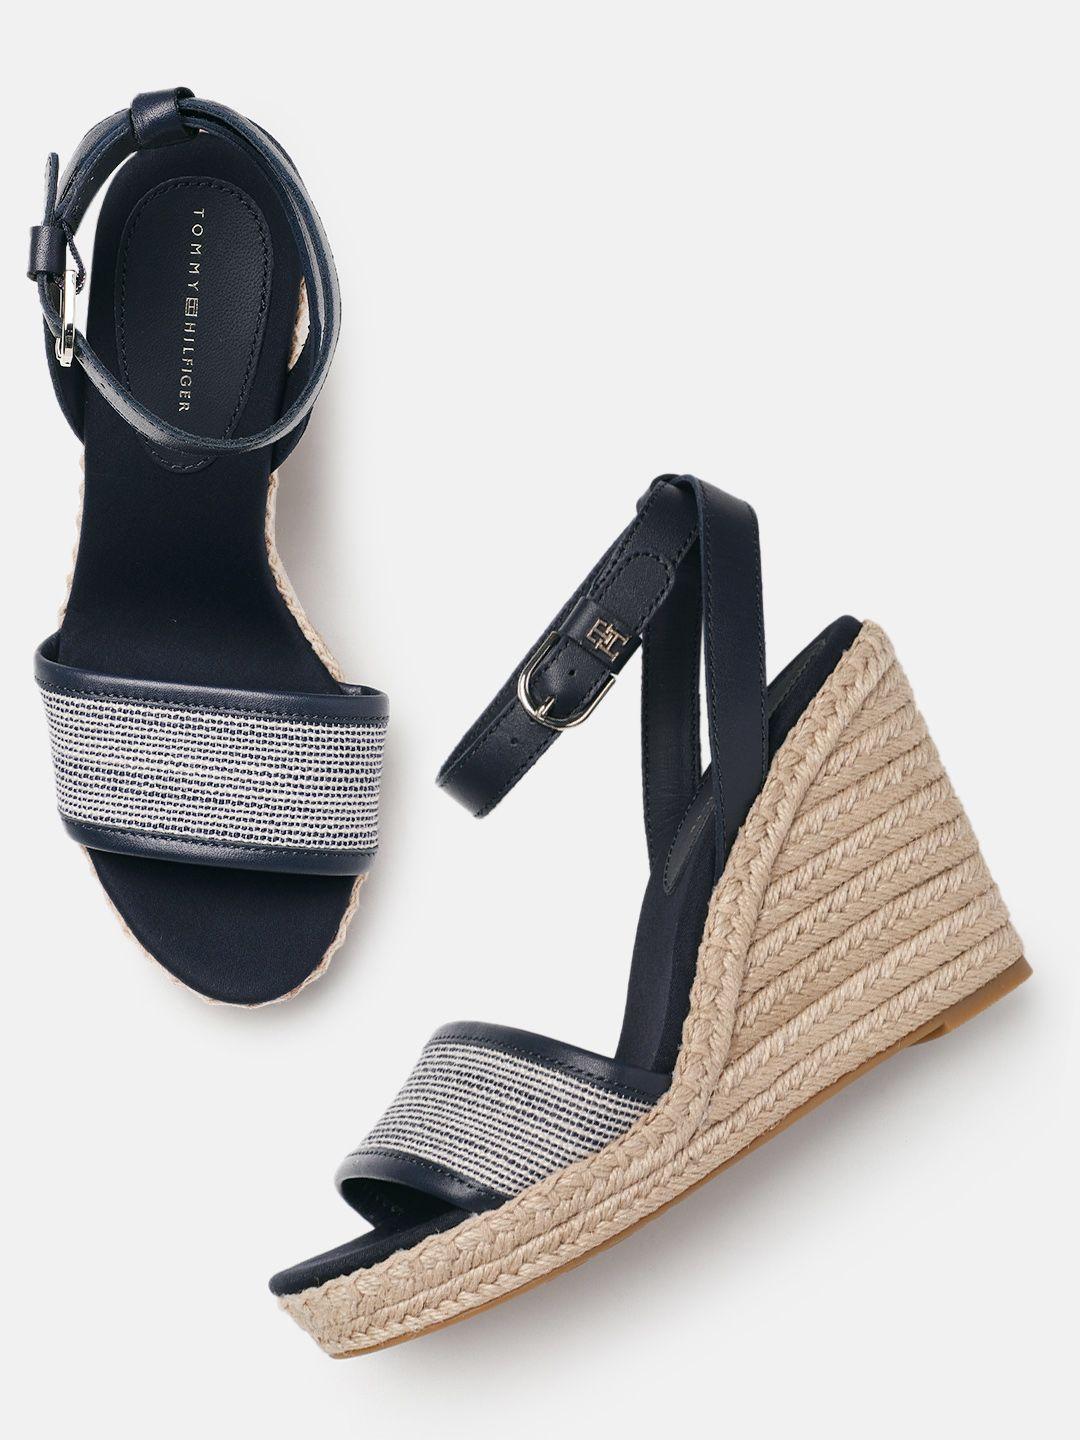 tommy-hilfiger-women-woven-textured-mid-top-wedge-sandals-with-buckle-detail